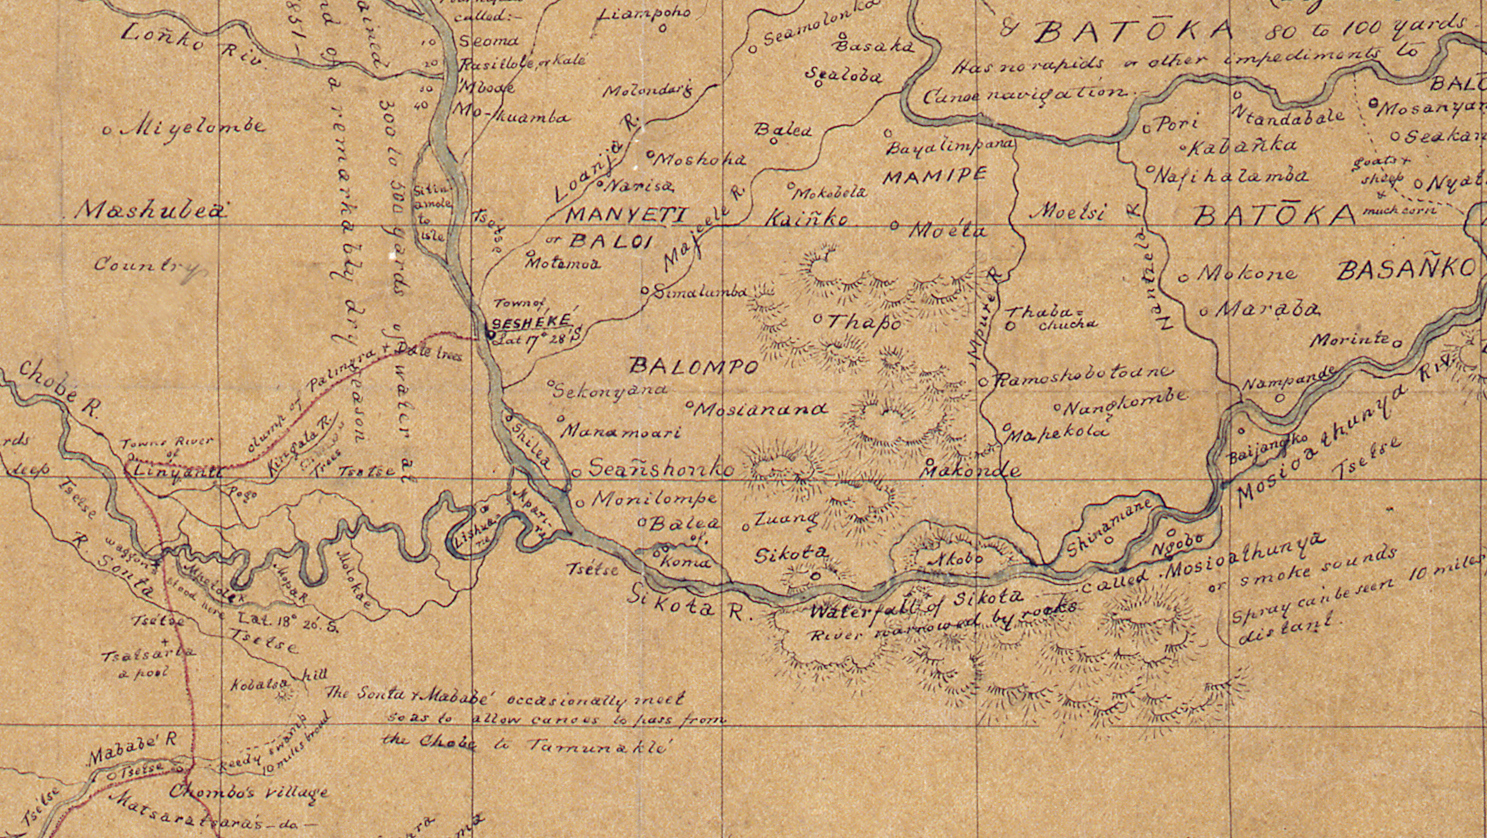 Image of Livingstone's Map of Barotseland (Livingstone 1851:[1]), detail. Image from SOAS Library, University of London. Image copyright Council for World Mission. Used by permission for private study, educational or research purposes only. Please contact SOAS Archives & Special Collections on docenquiry@soas.ac.uk for permission to use this material for any other purpose. As relevant, copyright Dr. Neil Imray Livingstone Wilson. Creative Commons Attribution-NonCommercial 3.0 Unported (https://creativecommons.org/licenses/by-nc/3.0/).